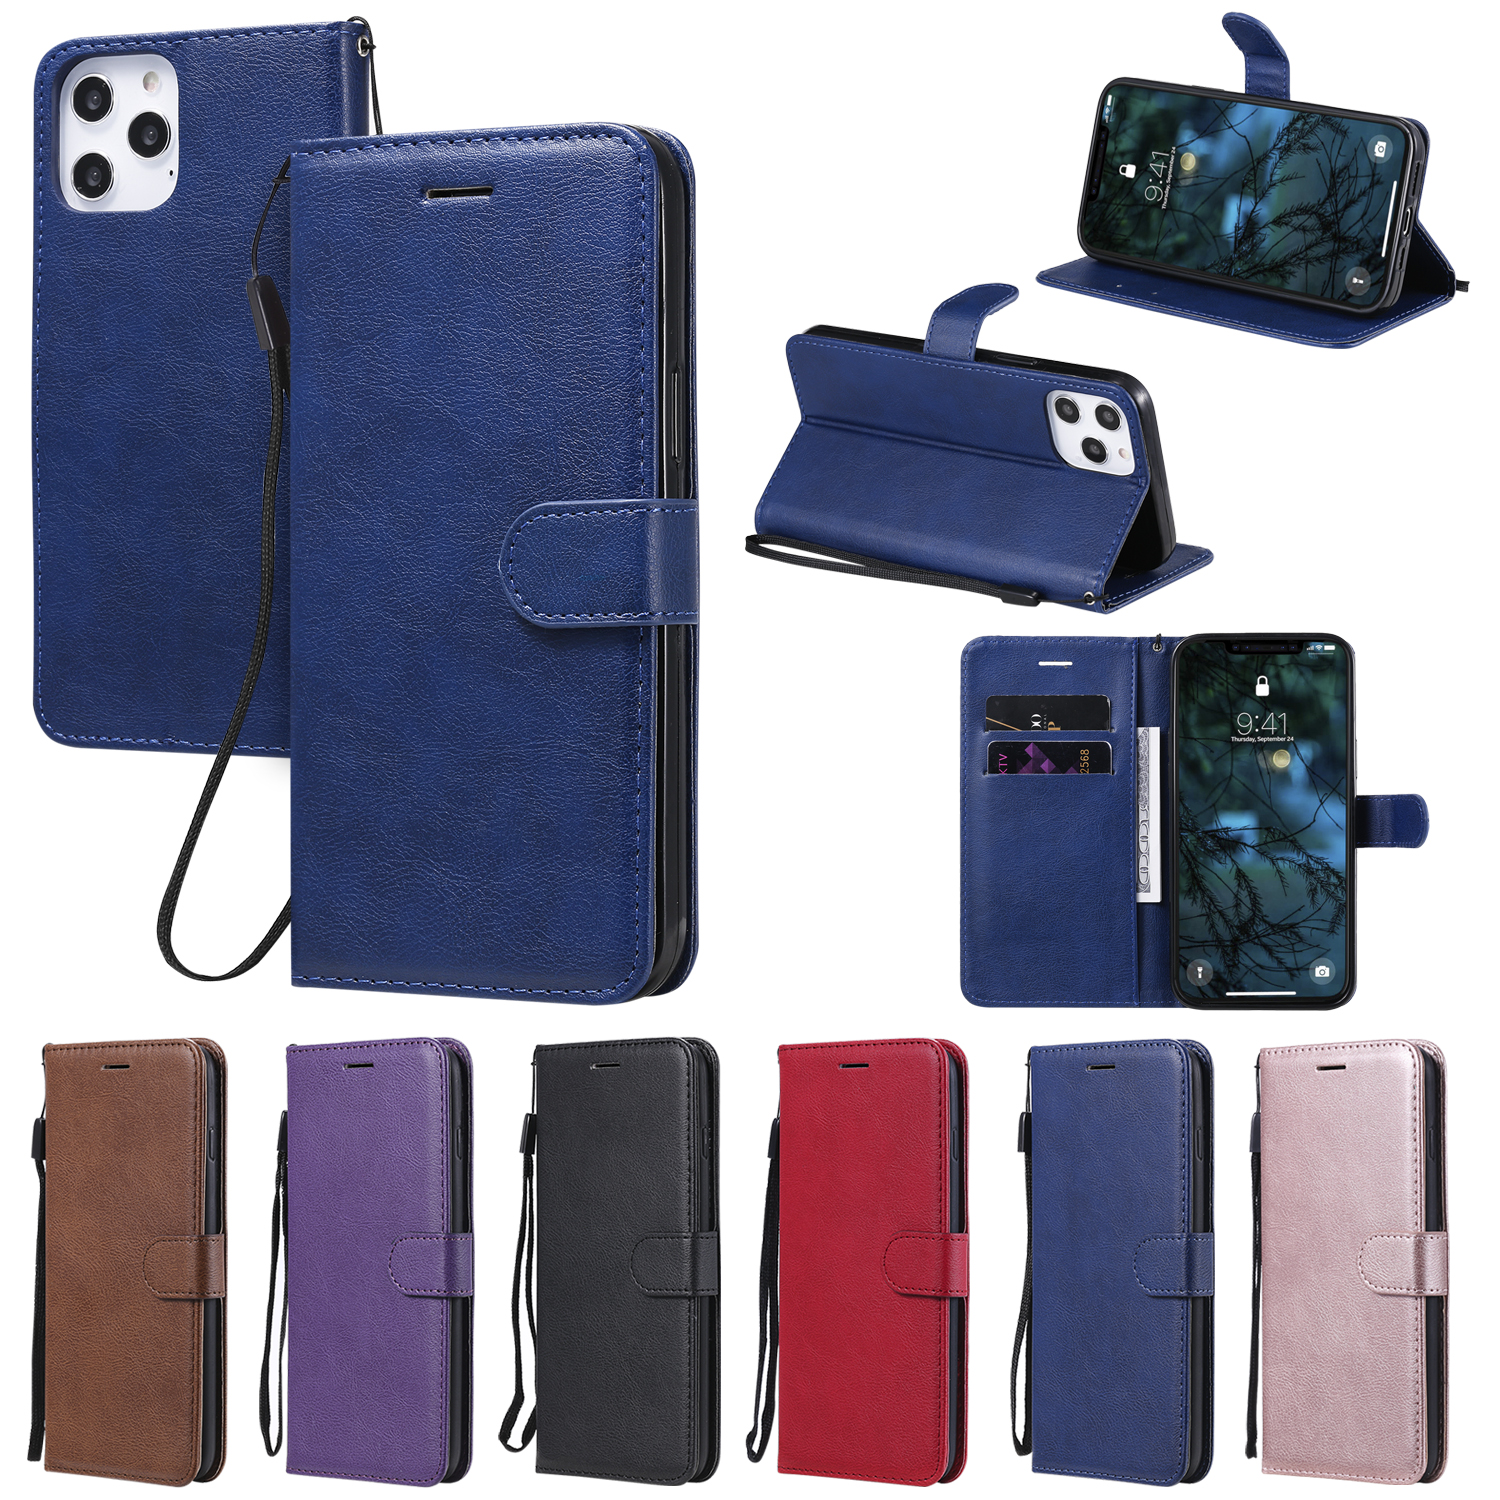 Samsung Galaxy S5/S6/S6 edge+/S7/S7 edge/S8/S8 plus case PU Leather Wallet Flip Pure color Phone casing cover （With Lanyard）